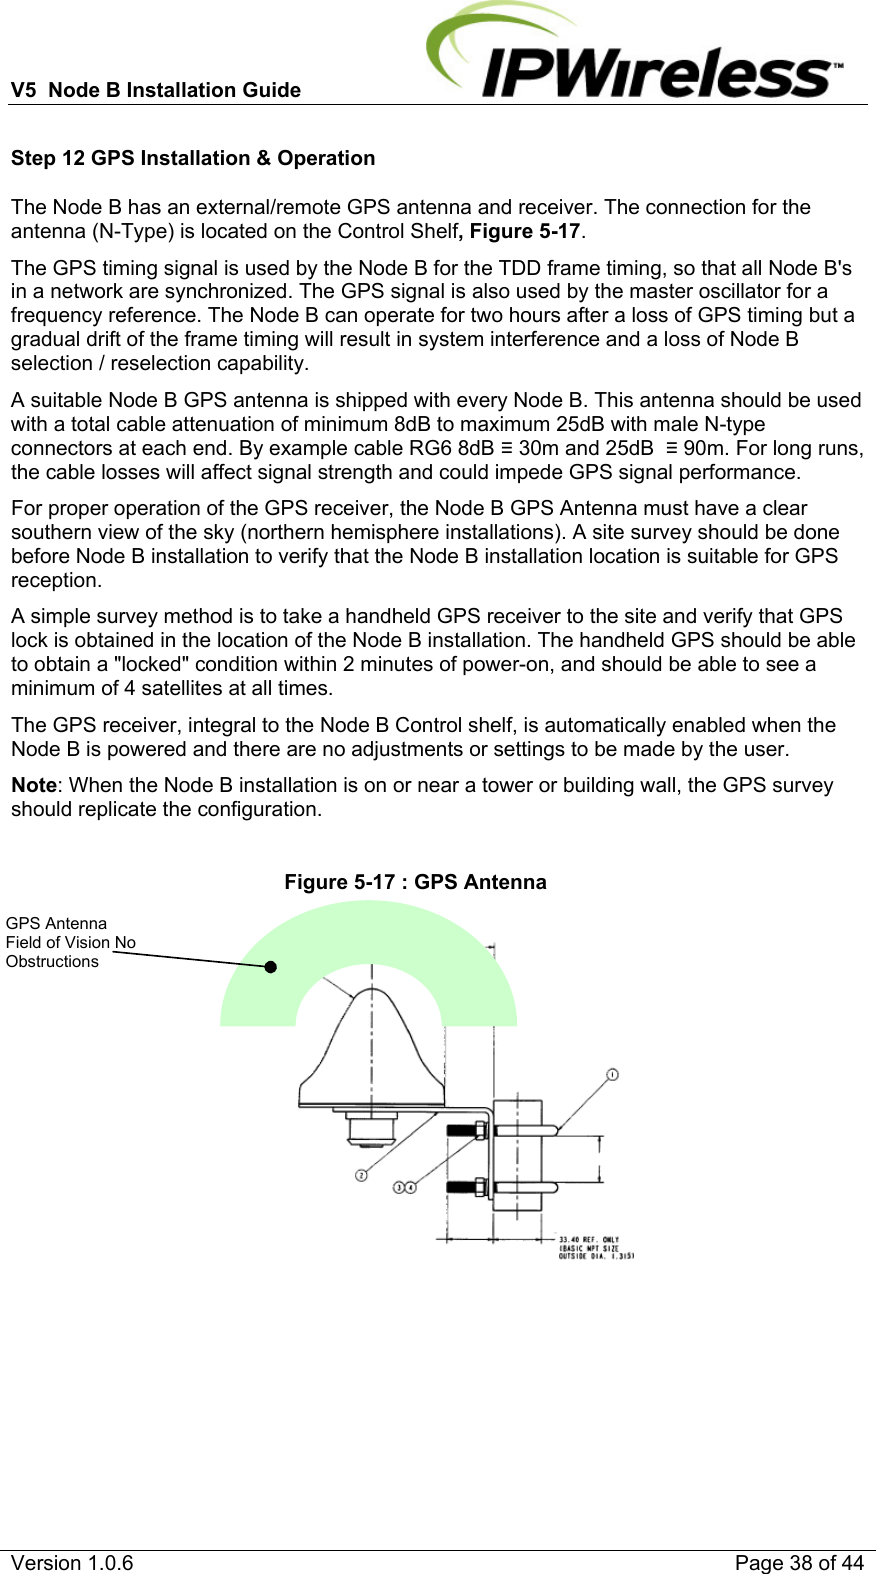 V5  Node B Installation Guide                           Version 1.0.6    Page 38 of 44 Step 12 GPS Installation &amp; Operation The Node B has an external/remote GPS antenna and receiver. The connection for the antenna (N-Type) is located on the Control Shelf, Figure 5-17. The GPS timing signal is used by the Node B for the TDD frame timing, so that all Node B&apos;s in a network are synchronized. The GPS signal is also used by the master oscillator for a frequency reference. The Node B can operate for two hours after a loss of GPS timing but a gradual drift of the frame timing will result in system interference and a loss of Node B selection / reselection capability. A suitable Node B GPS antenna is shipped with every Node B. This antenna should be used with a total cable attenuation of minimum 8dB to maximum 25dB with male N-type connectors at each end. By example cable RG6 8dB  30m and 25dB   90m. For long runs, the cable losses will affect signal strength and could impede GPS signal performance. For proper operation of the GPS receiver, the Node B GPS Antenna must have a clear southern view of the sky (northern hemisphere installations). A site survey should be done before Node B installation to verify that the Node B installation location is suitable for GPS reception. A simple survey method is to take a handheld GPS receiver to the site and verify that GPS lock is obtained in the location of the Node B installation. The handheld GPS should be able to obtain a &quot;locked&quot; condition within 2 minutes of power-on, and should be able to see a minimum of 4 satellites at all times. The GPS receiver, integral to the Node B Control shelf, is automatically enabled when the Node B is powered and there are no adjustments or settings to be made by the user. Note: When the Node B installation is on or near a tower or building wall, the GPS survey should replicate the configuration.  Figure 5-17 : GPS Antenna    GPS Antenna Field of Vision No Obstructions 